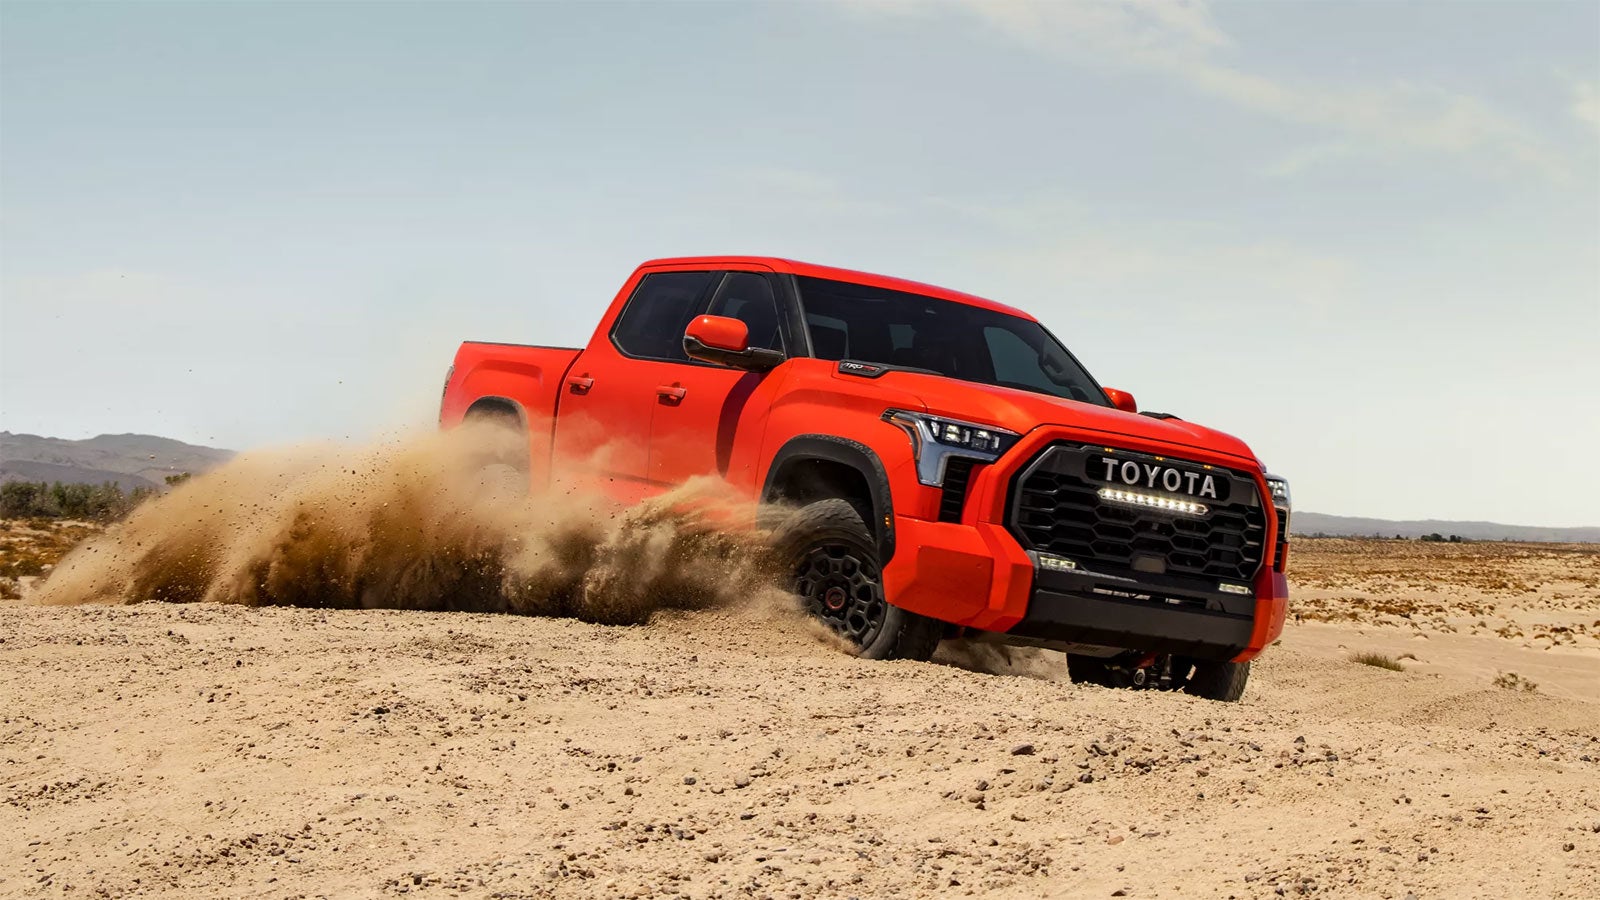 2022 Toyota Tundra Gallery | Fort Dodge Toyota in Fort Dodge IA